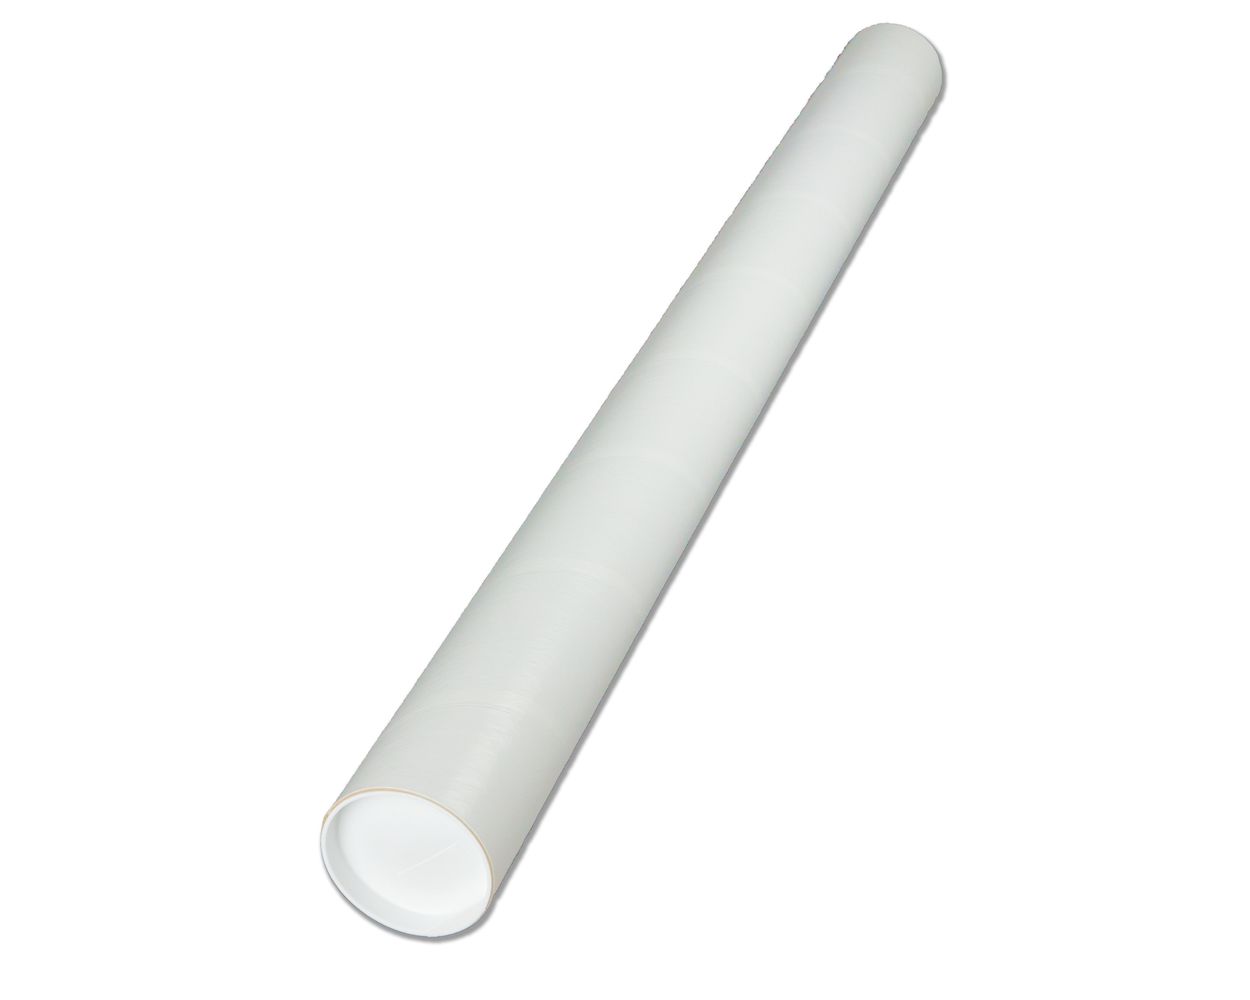 Pack of 50 Ship Now Supply SNMTM324 Triangle Mailing Tubes 3 x 24 1/4 3 x 24 1/4 Box Partners Oyster White